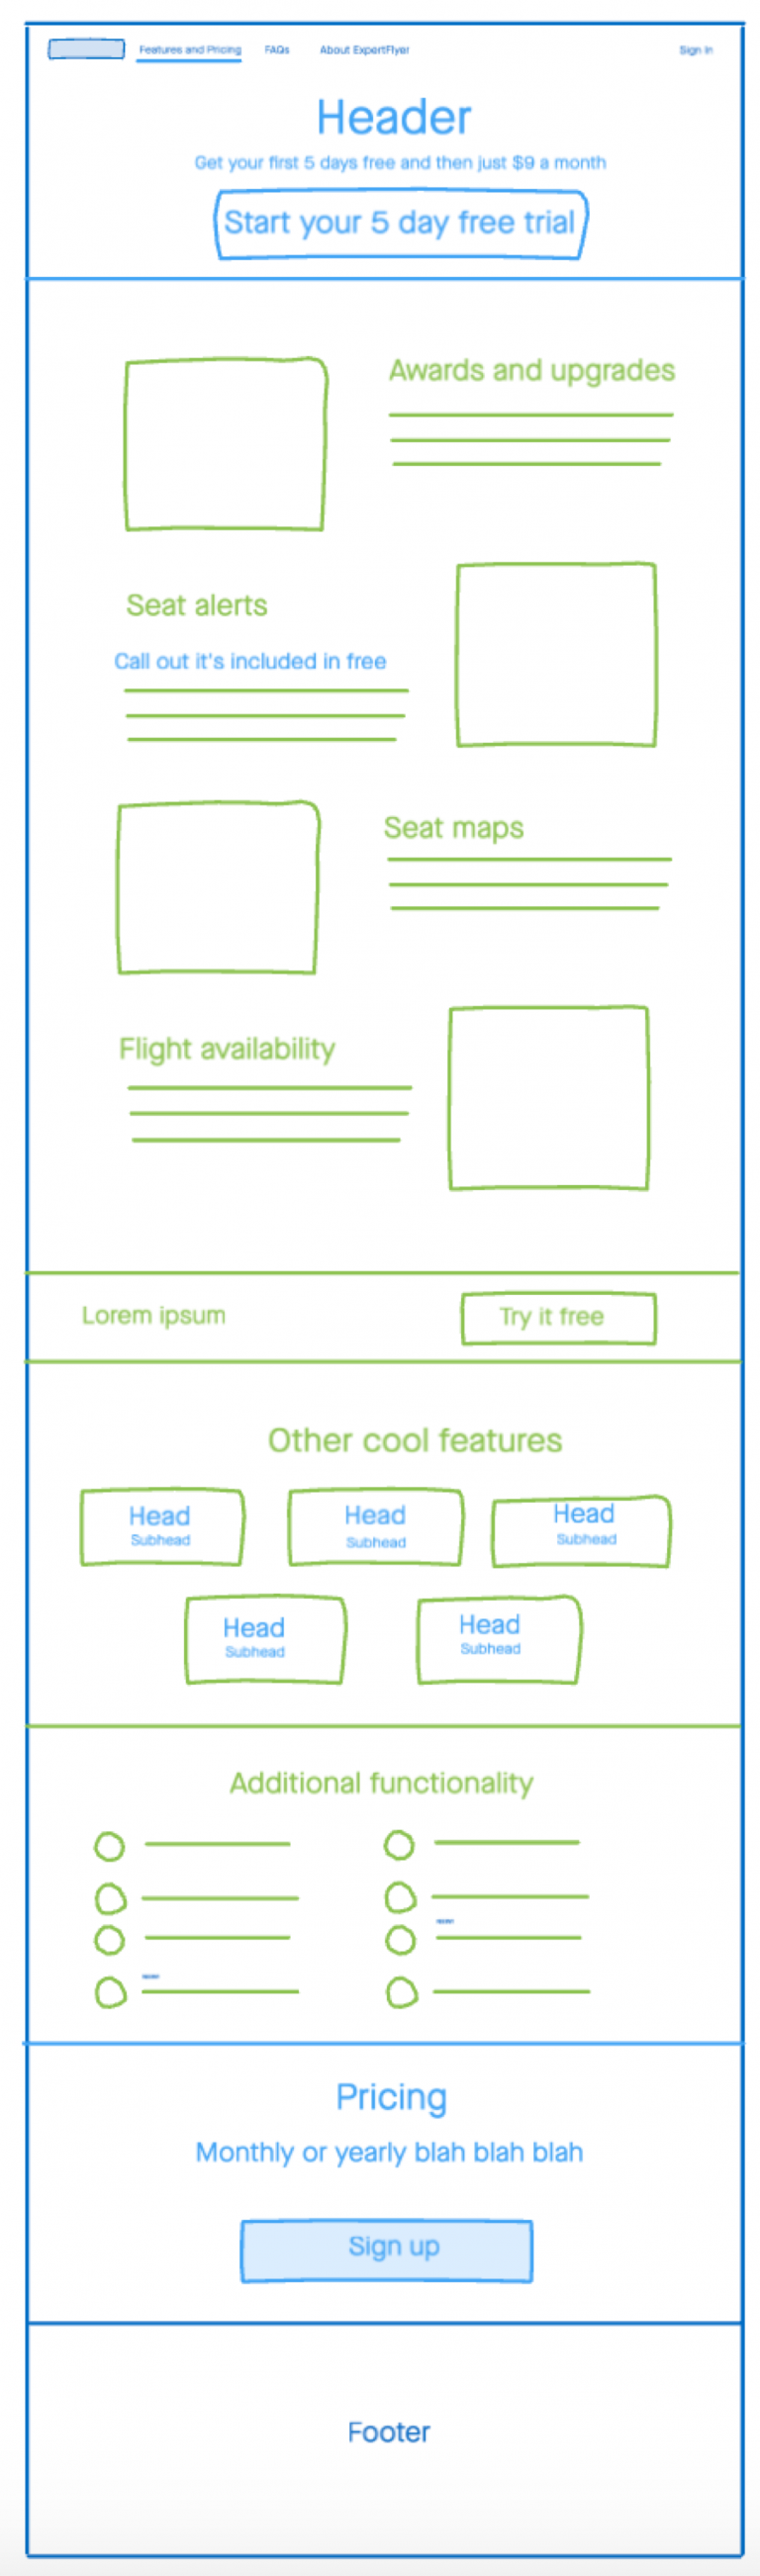 Image of an InVision Freehand for the features & pricing page